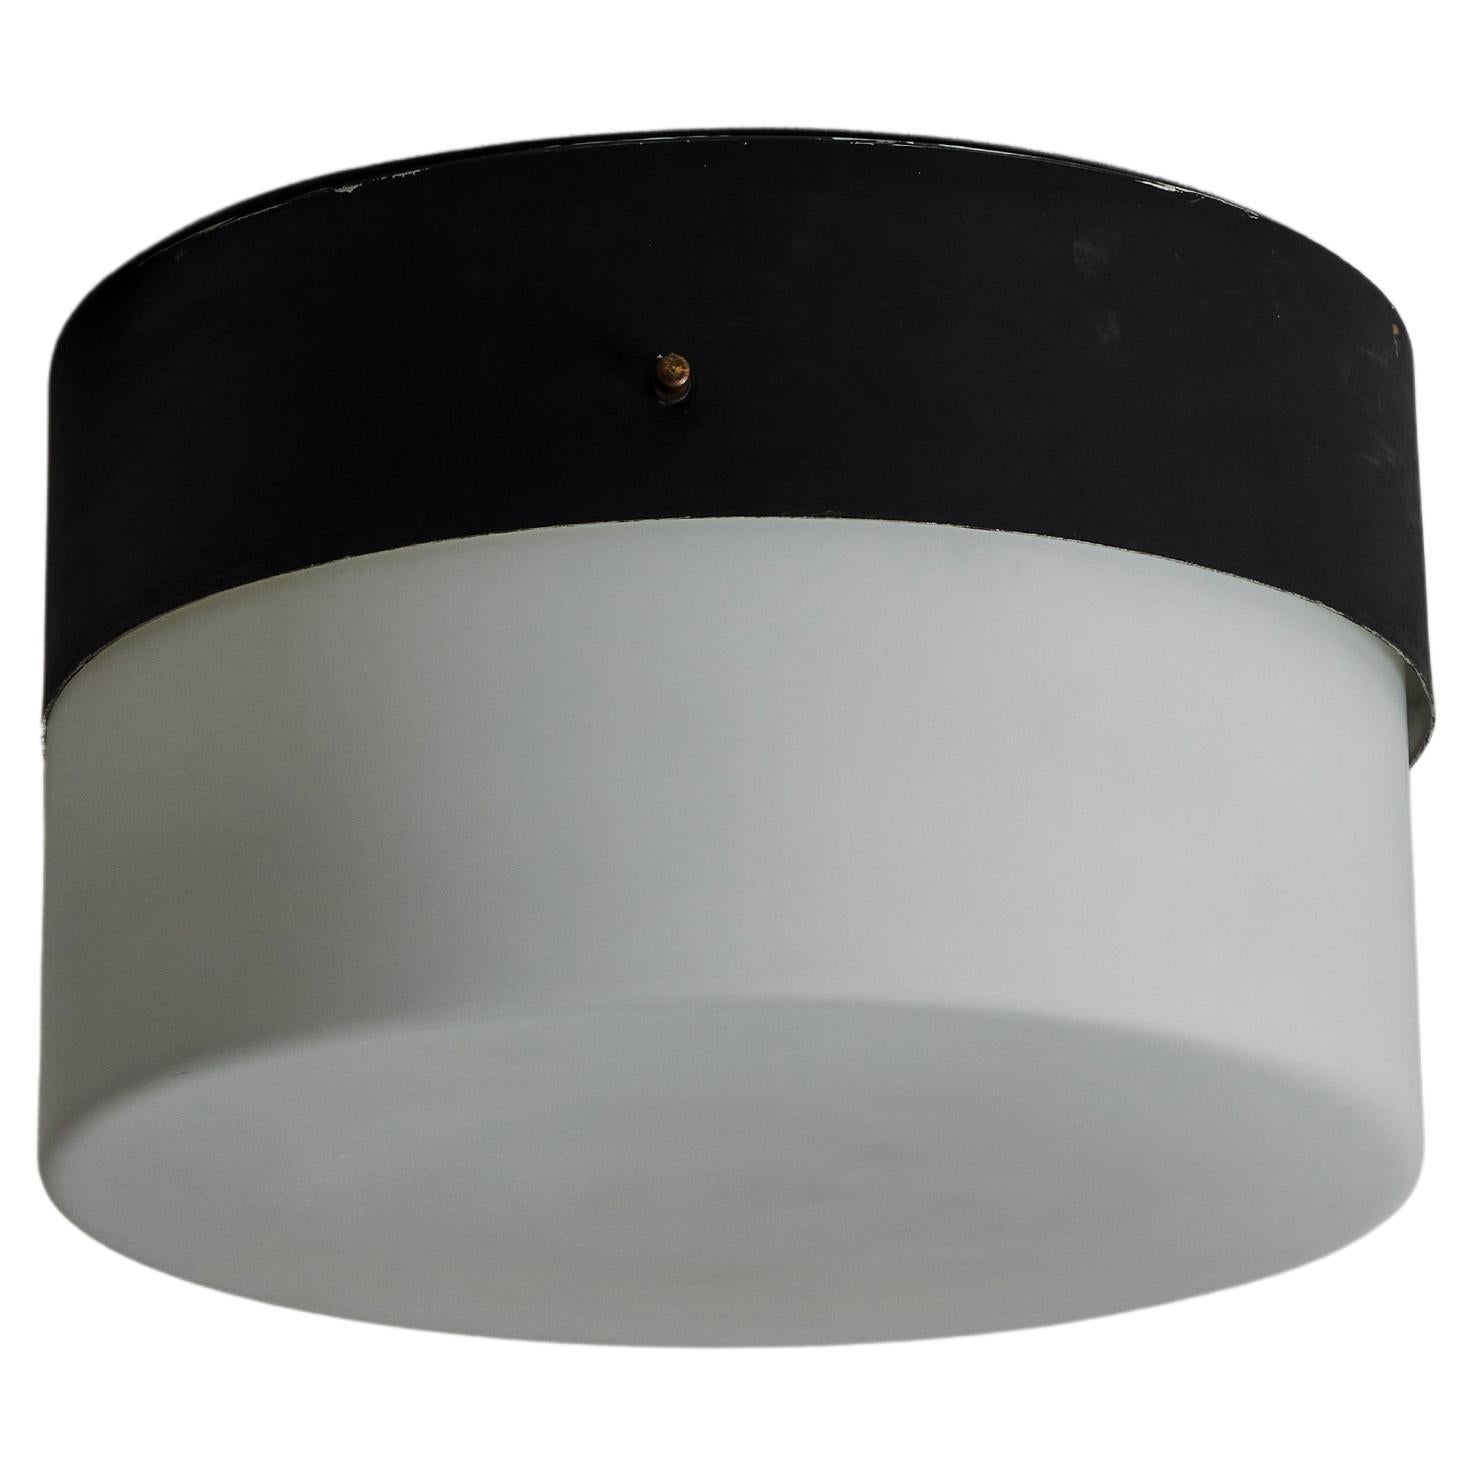 Flushmount ceiling light by Stilnovo. Manufactured in Italy, circa 1960s. Brass hardware, enameled aluminum, opaline glass diffusers. Wired for U.S. standards. We recommend three E27 60w maximum bulbs. Bulbs not includes. 
 

You can find the same